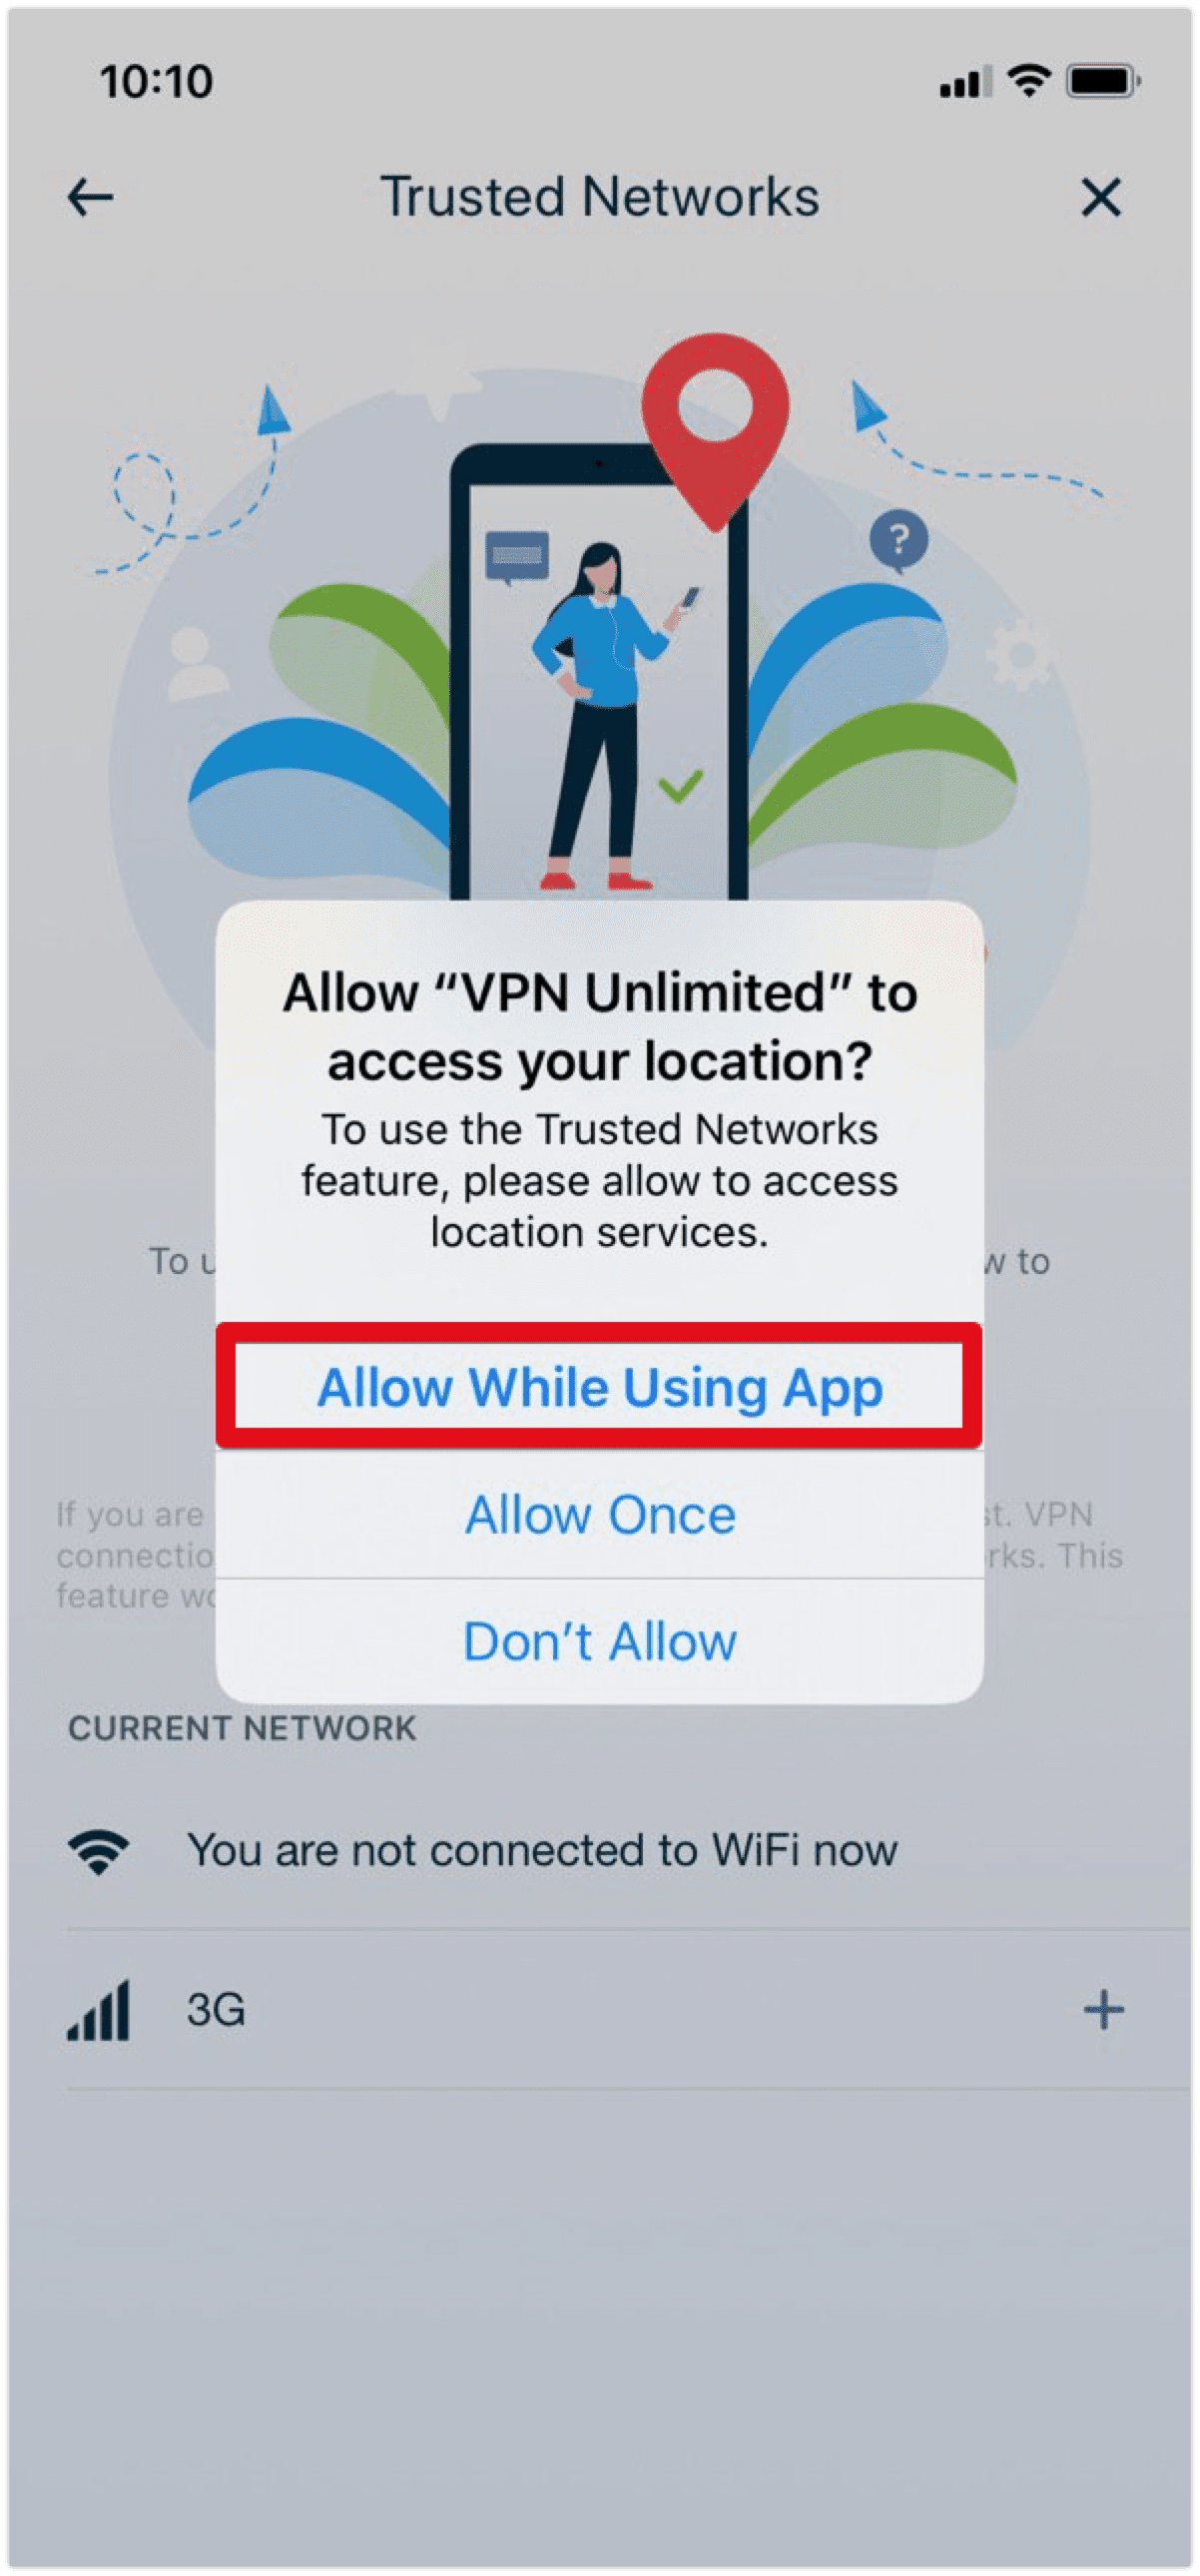 Allow VPN Unlimited to access your location